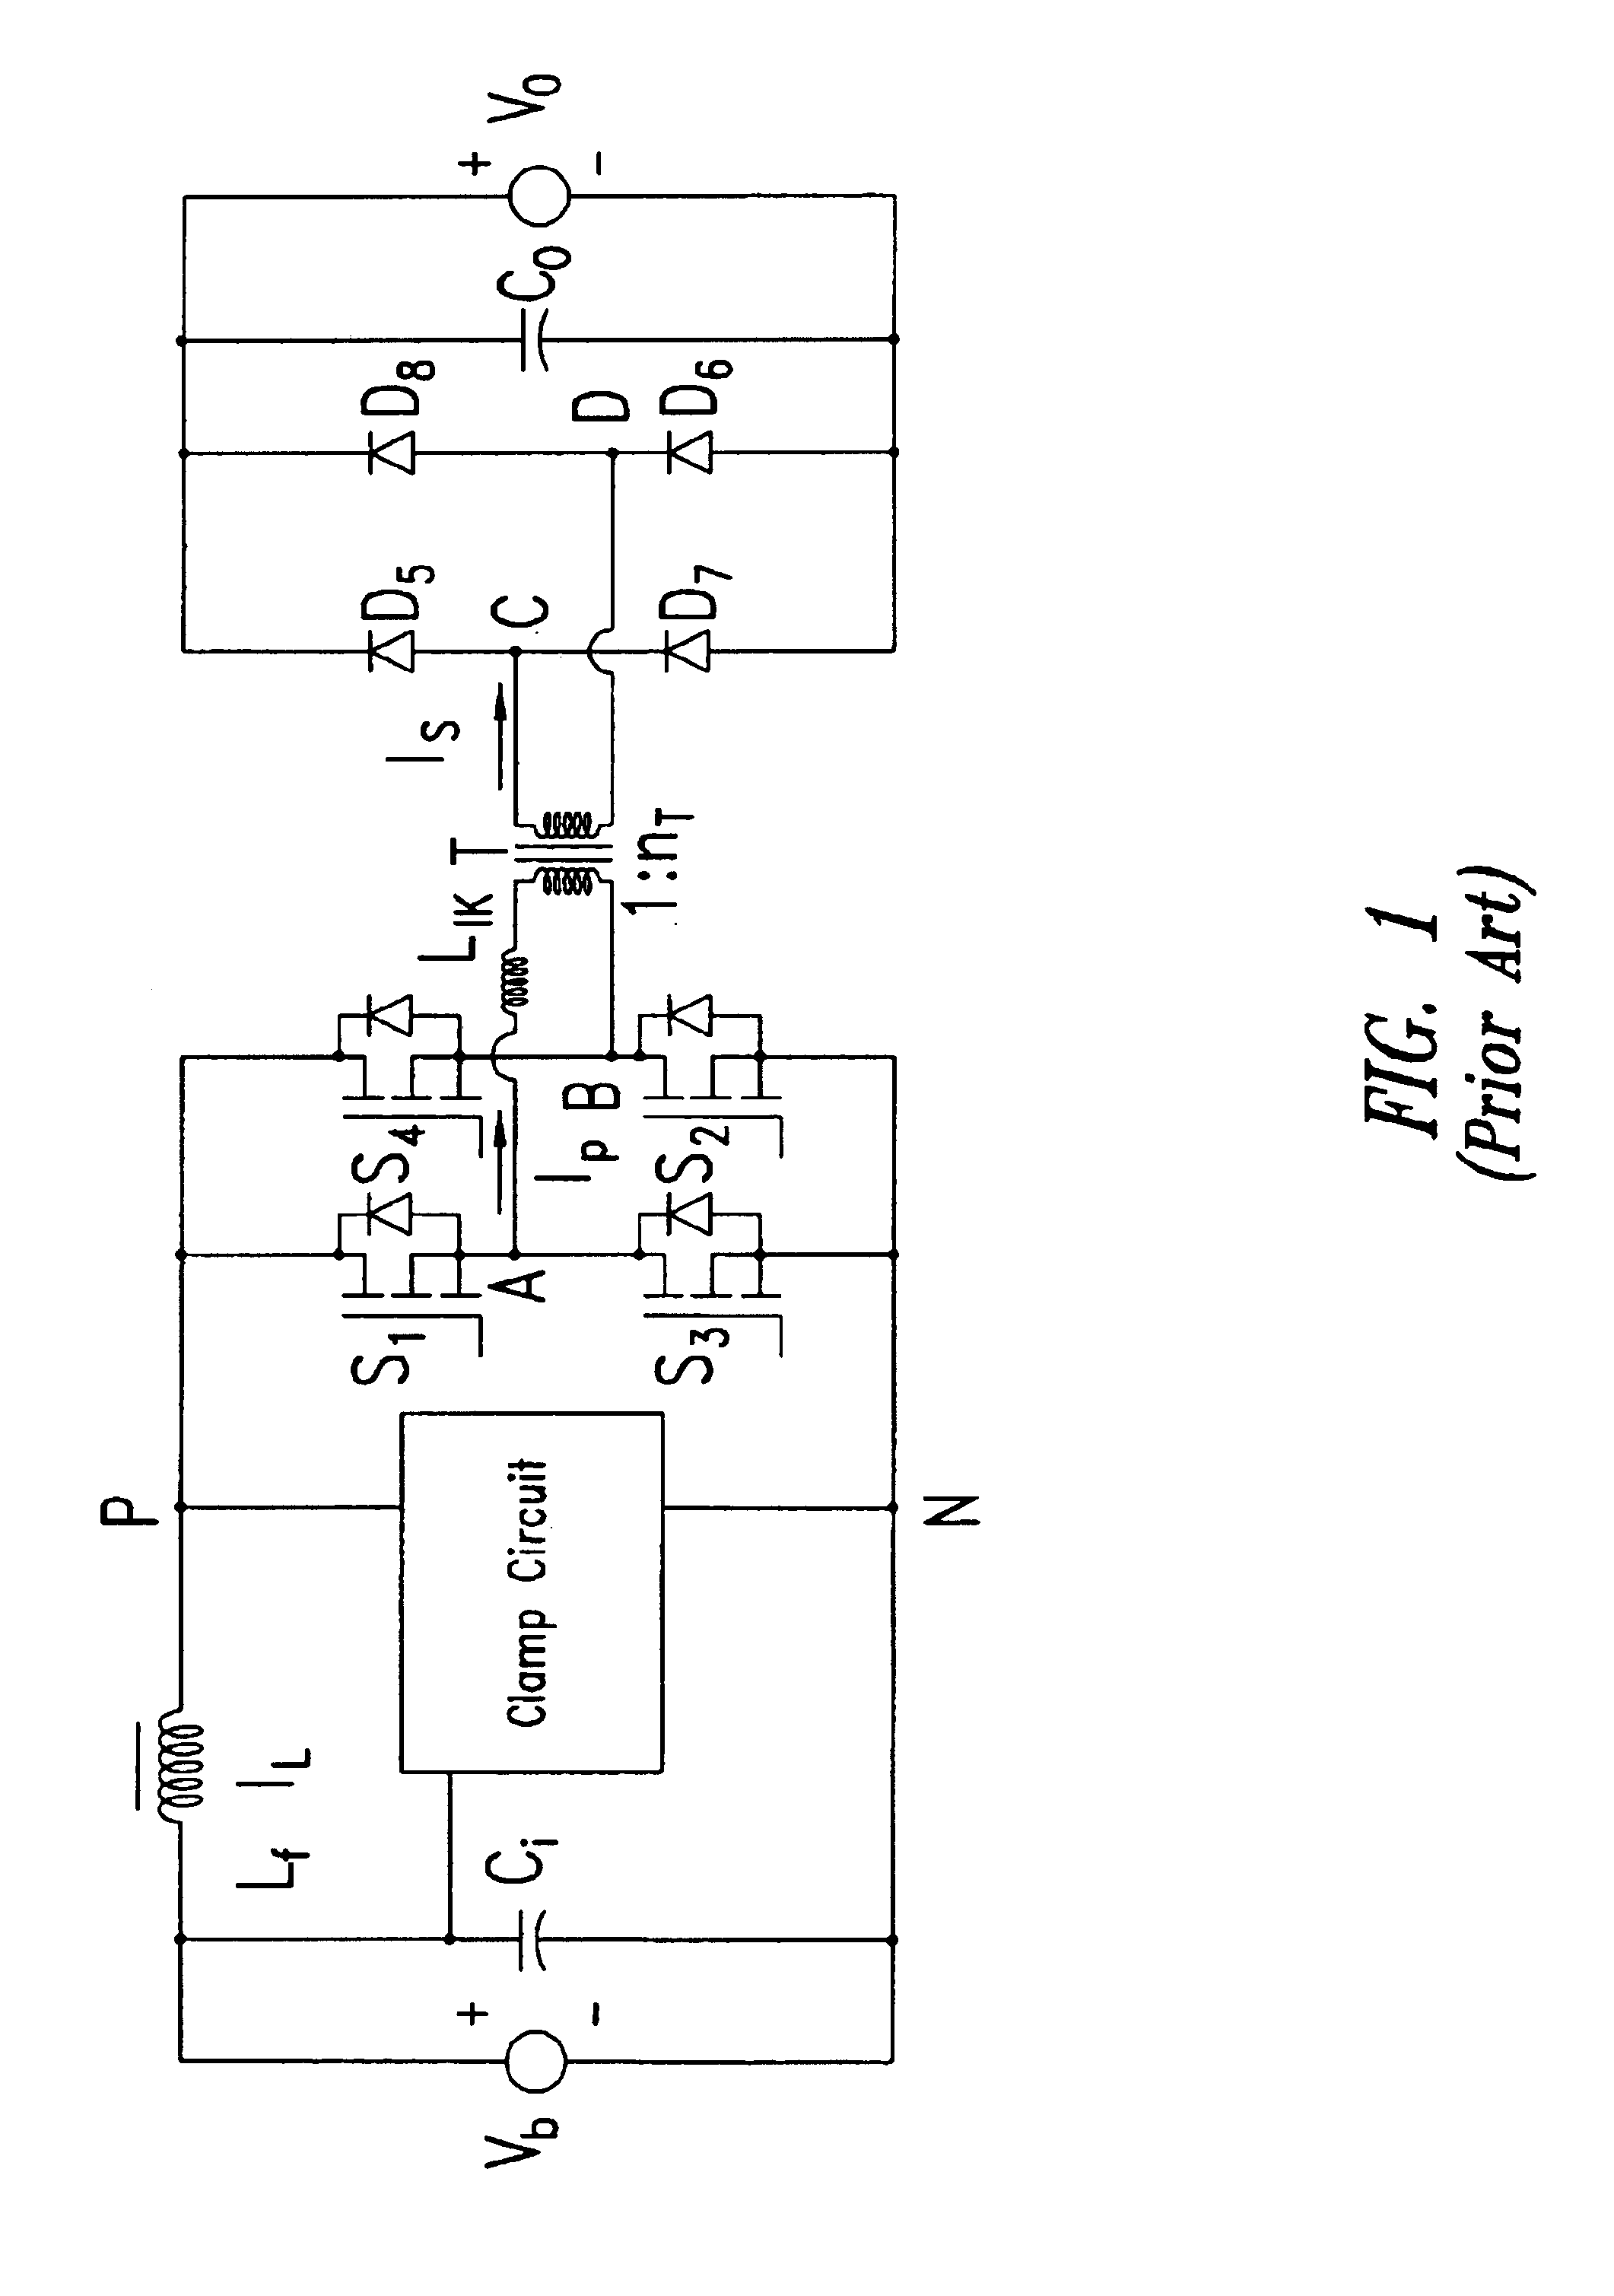 Device and method of commutation control for an isolated boost converter